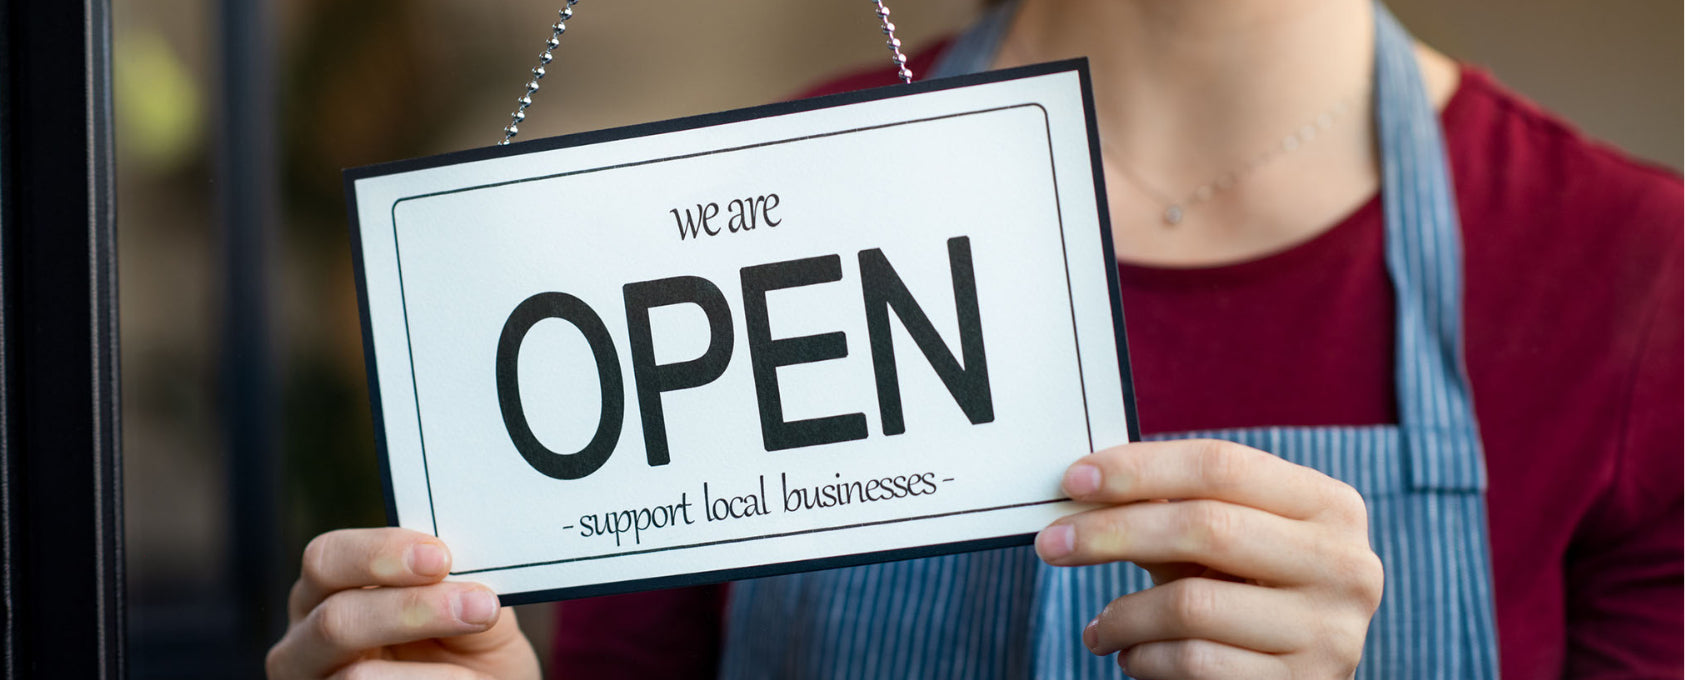 5 Reasons to Shop Small Businesses